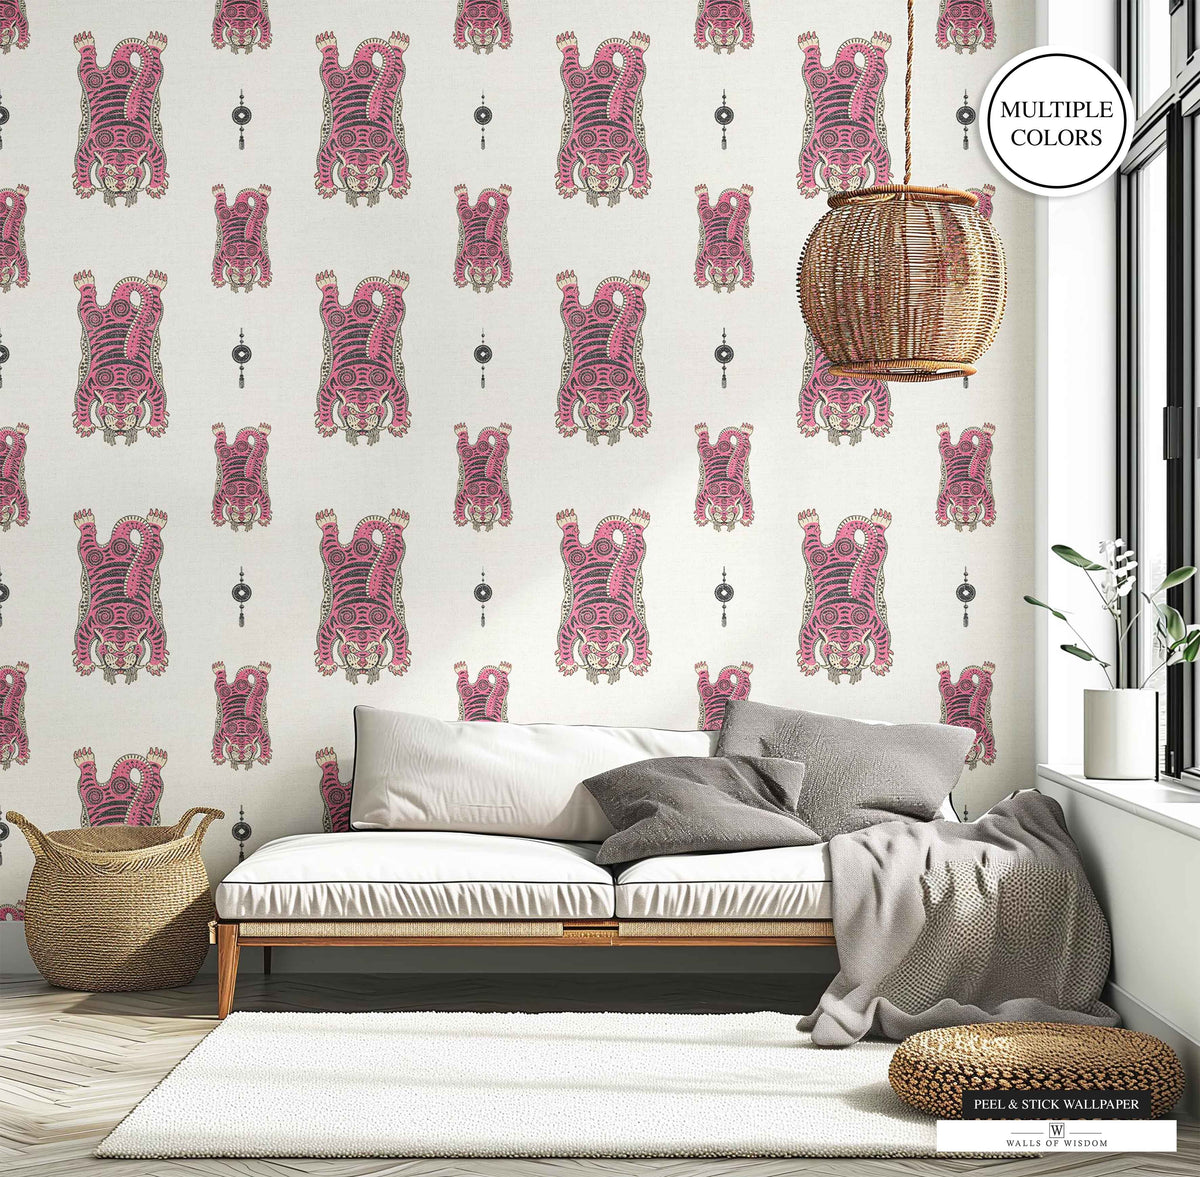 Pink and linen Tibetan Tiger Wallpaper with black Chinese lanterns, offering a boho maximalist vibe.